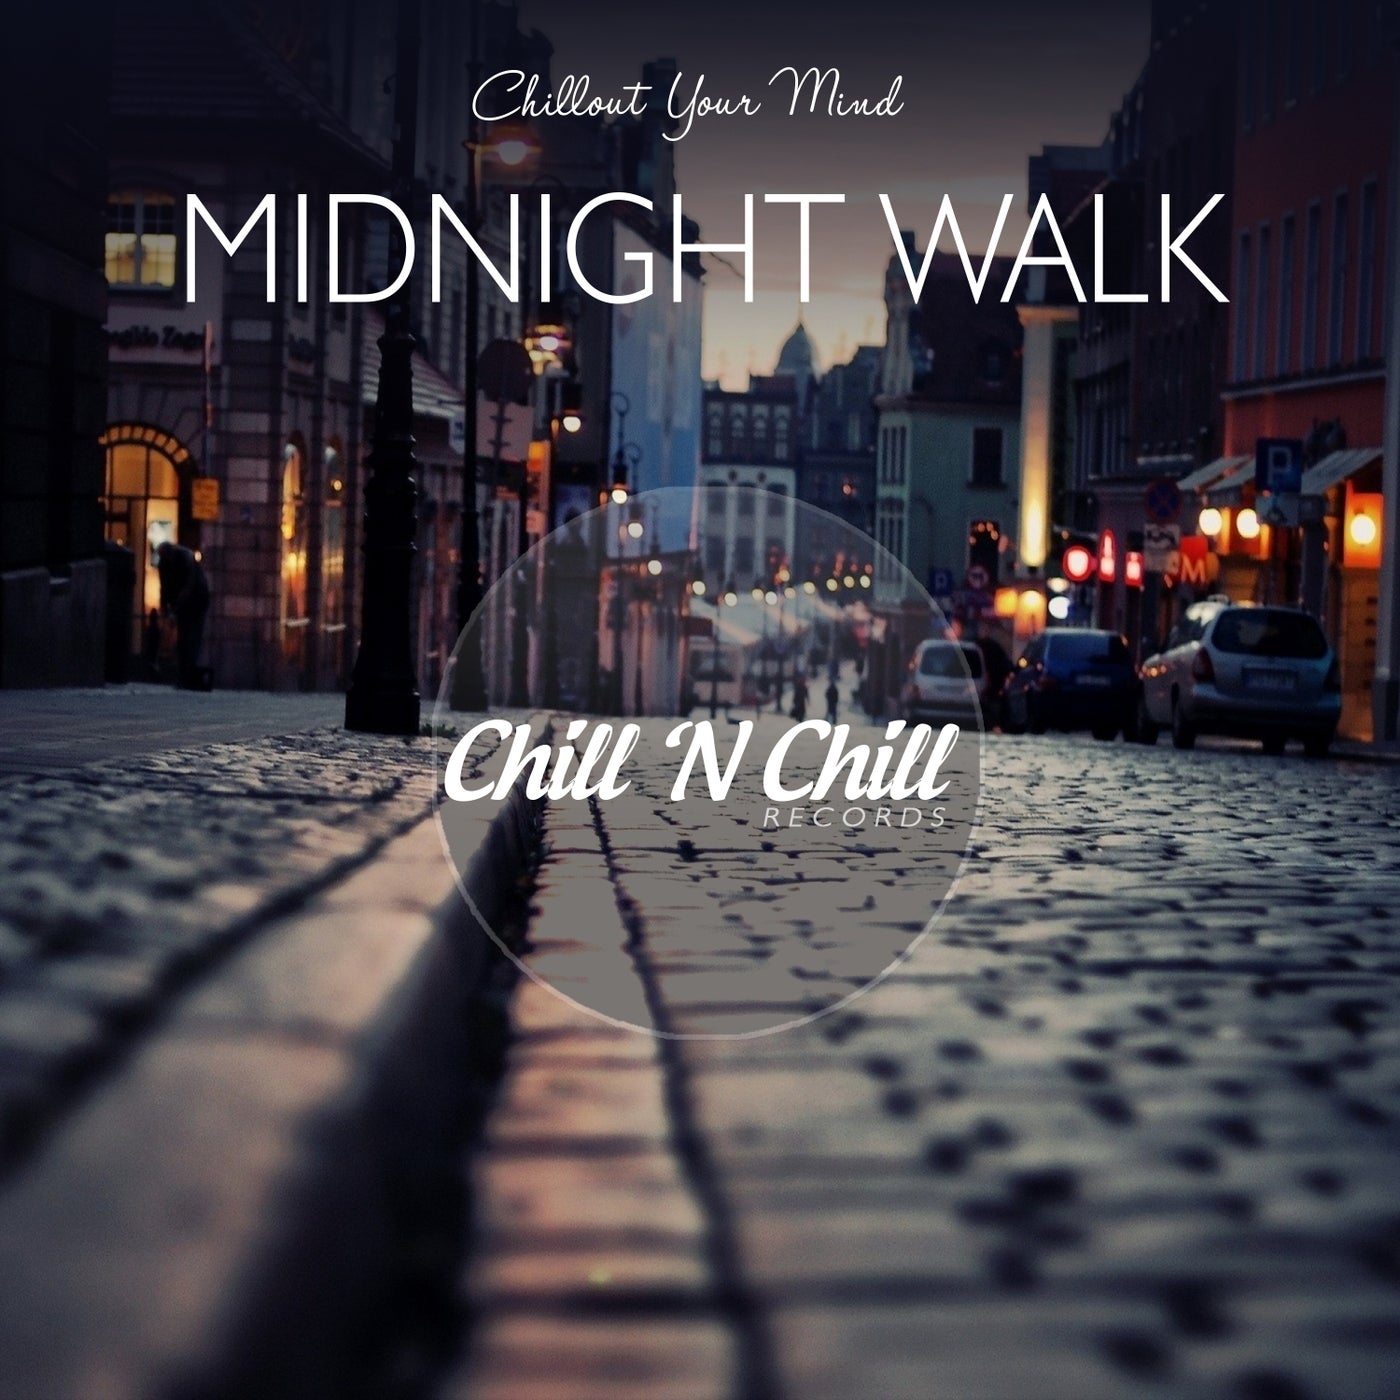 Midnight Walk: Chillout Your Mind